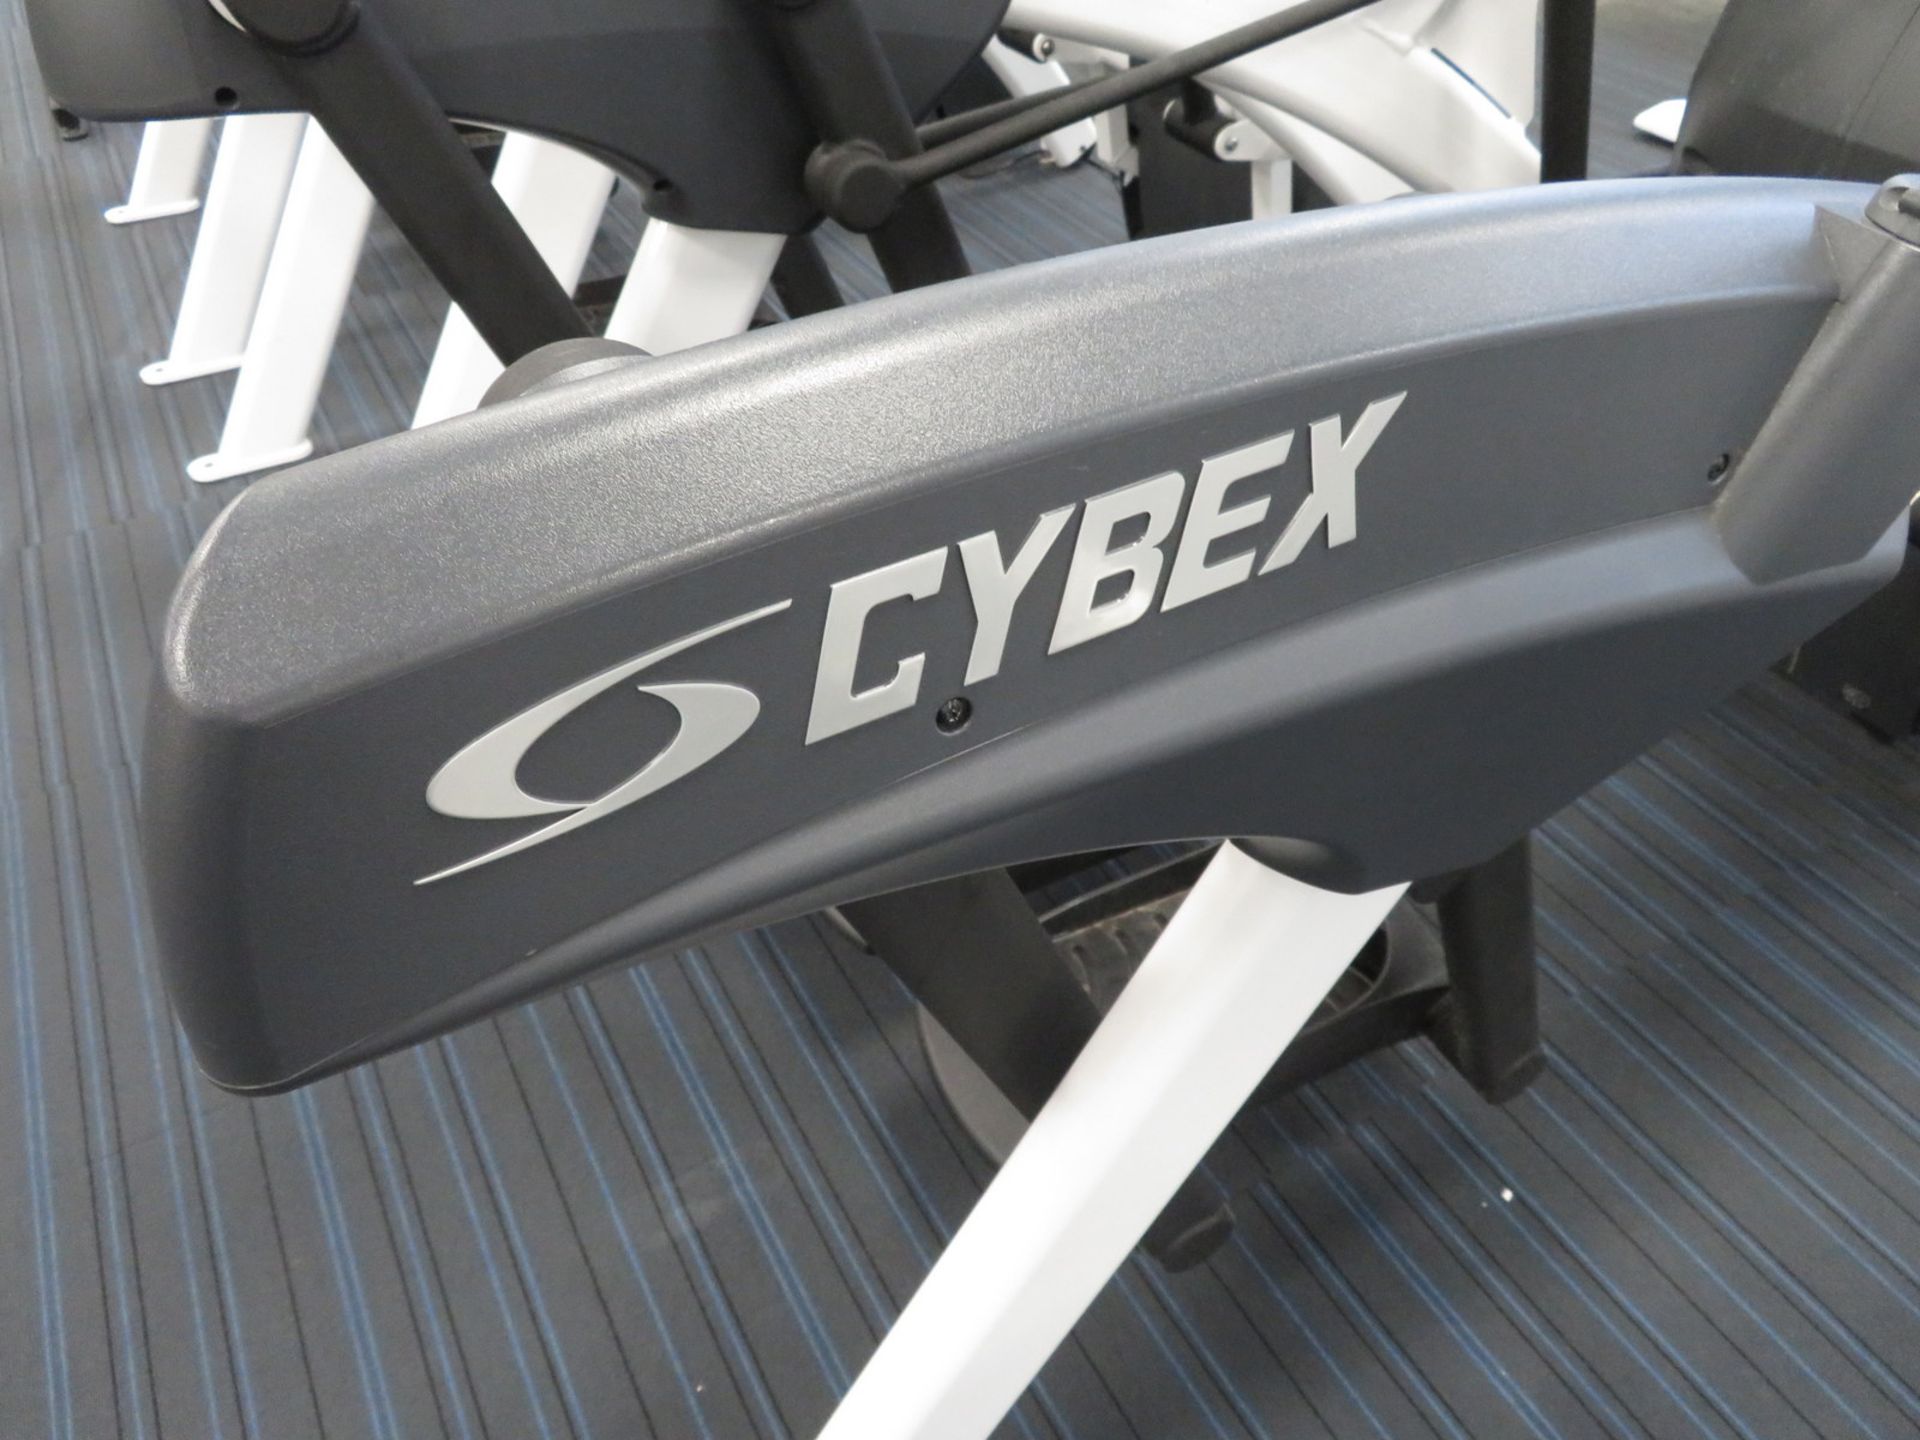 Cybex Arc Trainer Model: 772AT. Working Condition With TV Display Monitor. - Image 4 of 11